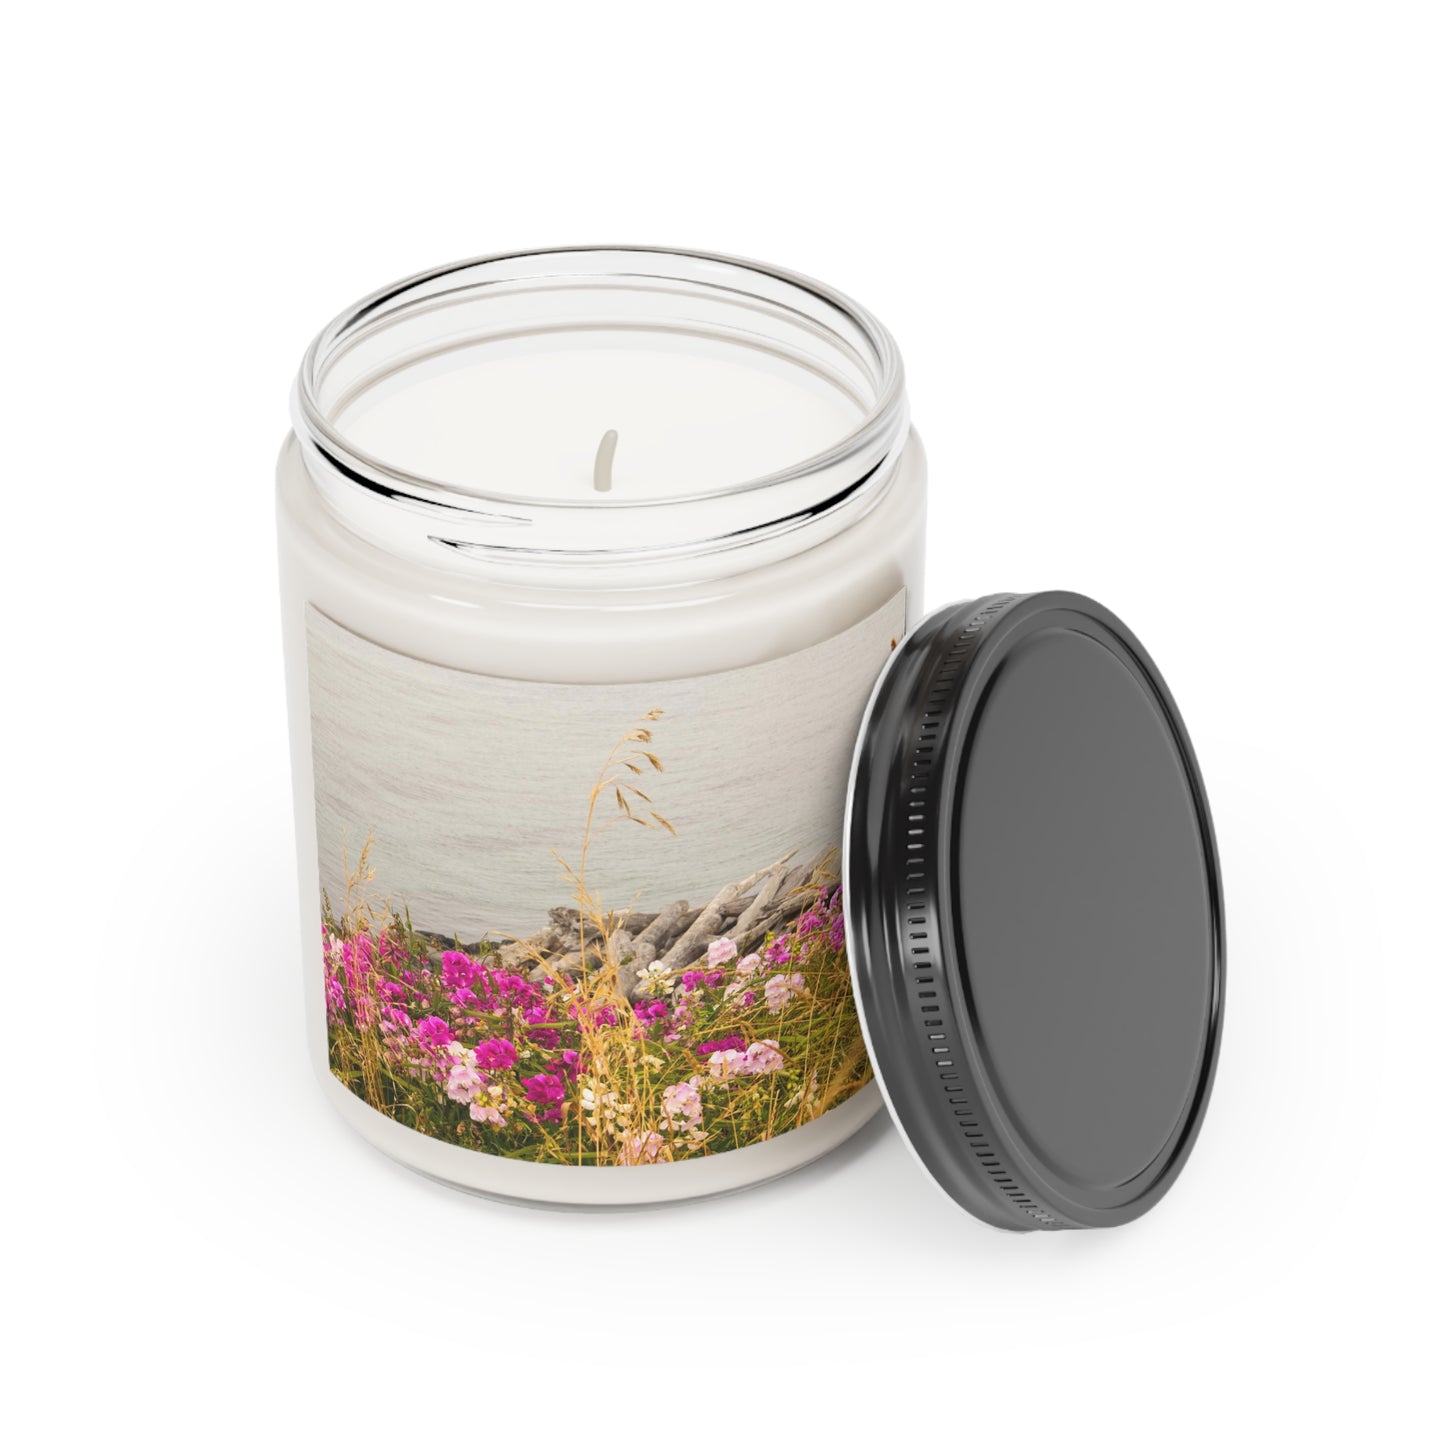 Ocean Beach Flower Photo Scented Candle, 9oz